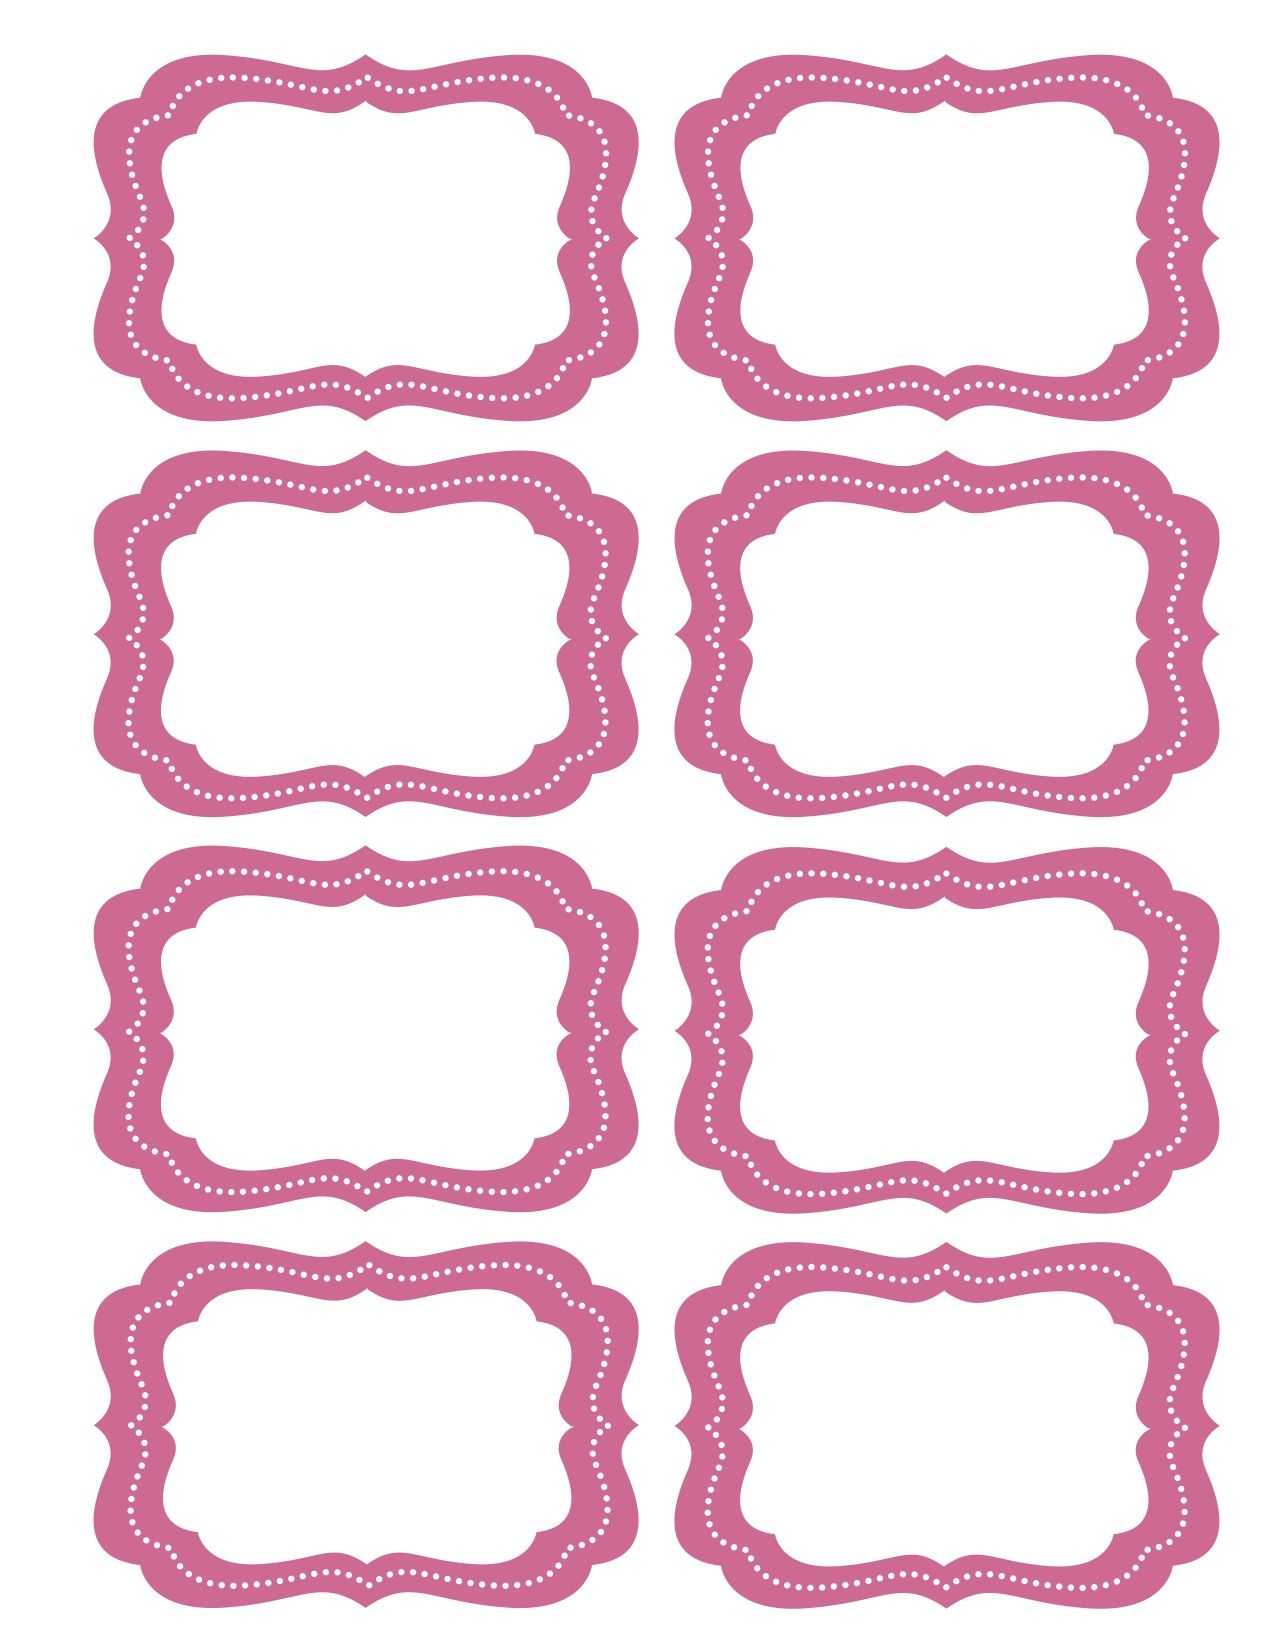 Free Printable Bag Label Templates | Candy Labels Blank Regarding Blank Luggage Tag Template